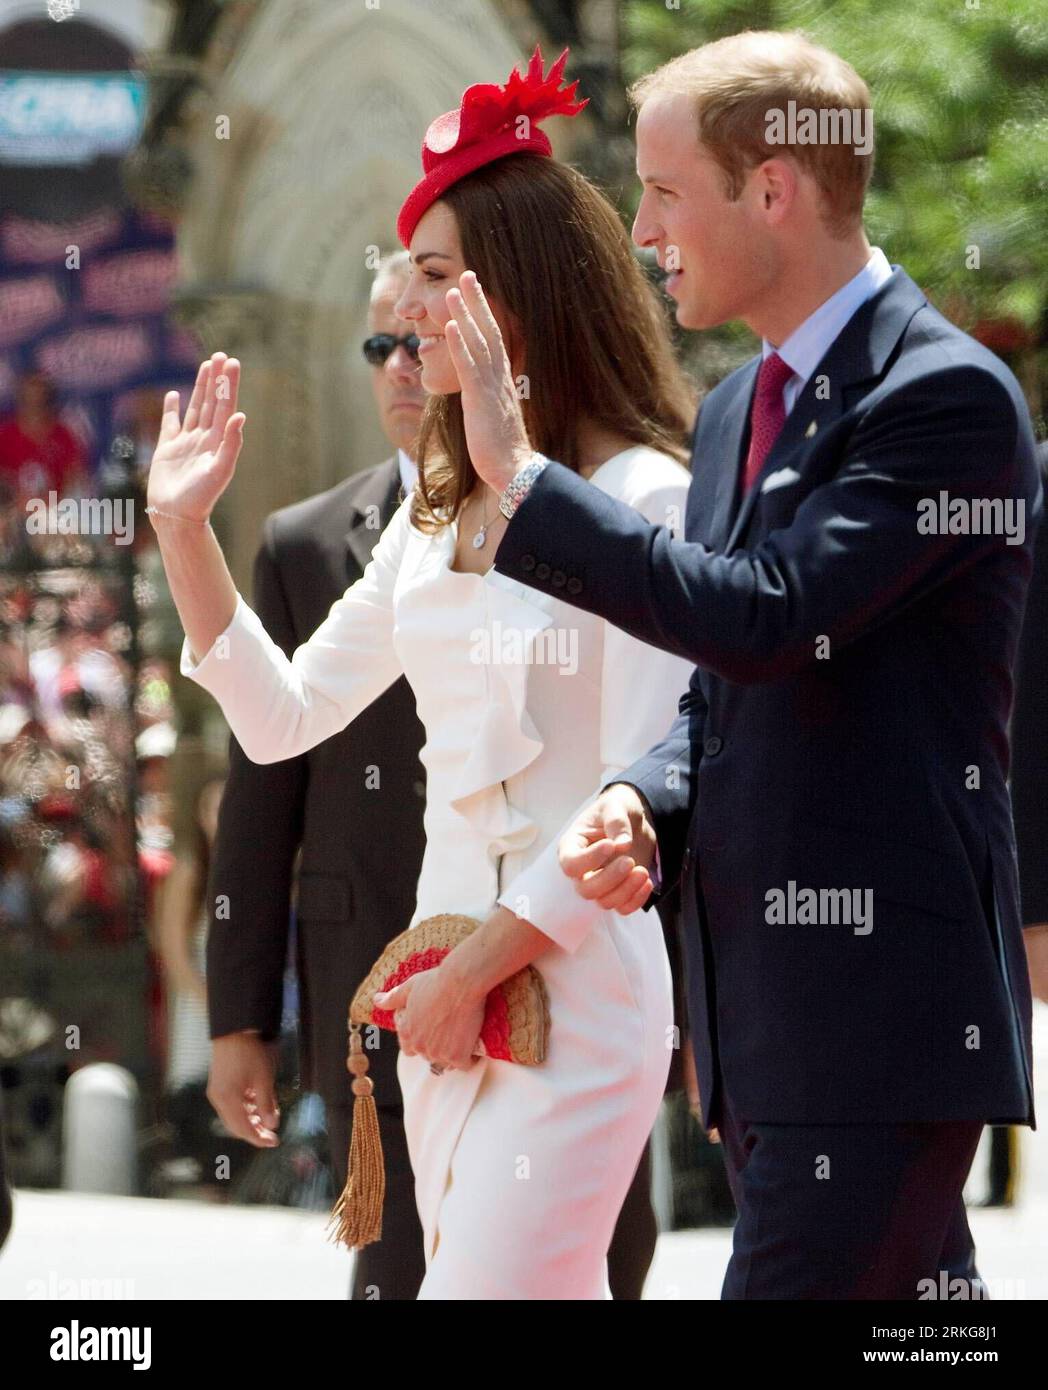 Bildnummer: 55565297  Datum: 01.07.2011  Copyright: imago/Xinhua (110702)-- OTTAWA, July 2, 2011 (Xinhua) -- Britain s Prince William and his wife Kate wave to the crowds during the 144th Canada Day celebrations on Parliament Hill in Ottawa, Canada, on July 1, 2011. The Royal couple is on a nine-day official visit to Canada, their first overseas trip since being married.(Xinhua/Jason Ransom)(zl) CANADA-CANADA DAY-CELEBRATION PUBLICATIONxNOTxINxCHN People Entertainment Adel GBR Königshaus Familie Frau Ehefrau Kate Ehemann Mann xda x0x premiumd Middleton 2011 hoch  Catherine Duchess Cambridge Stock Photo